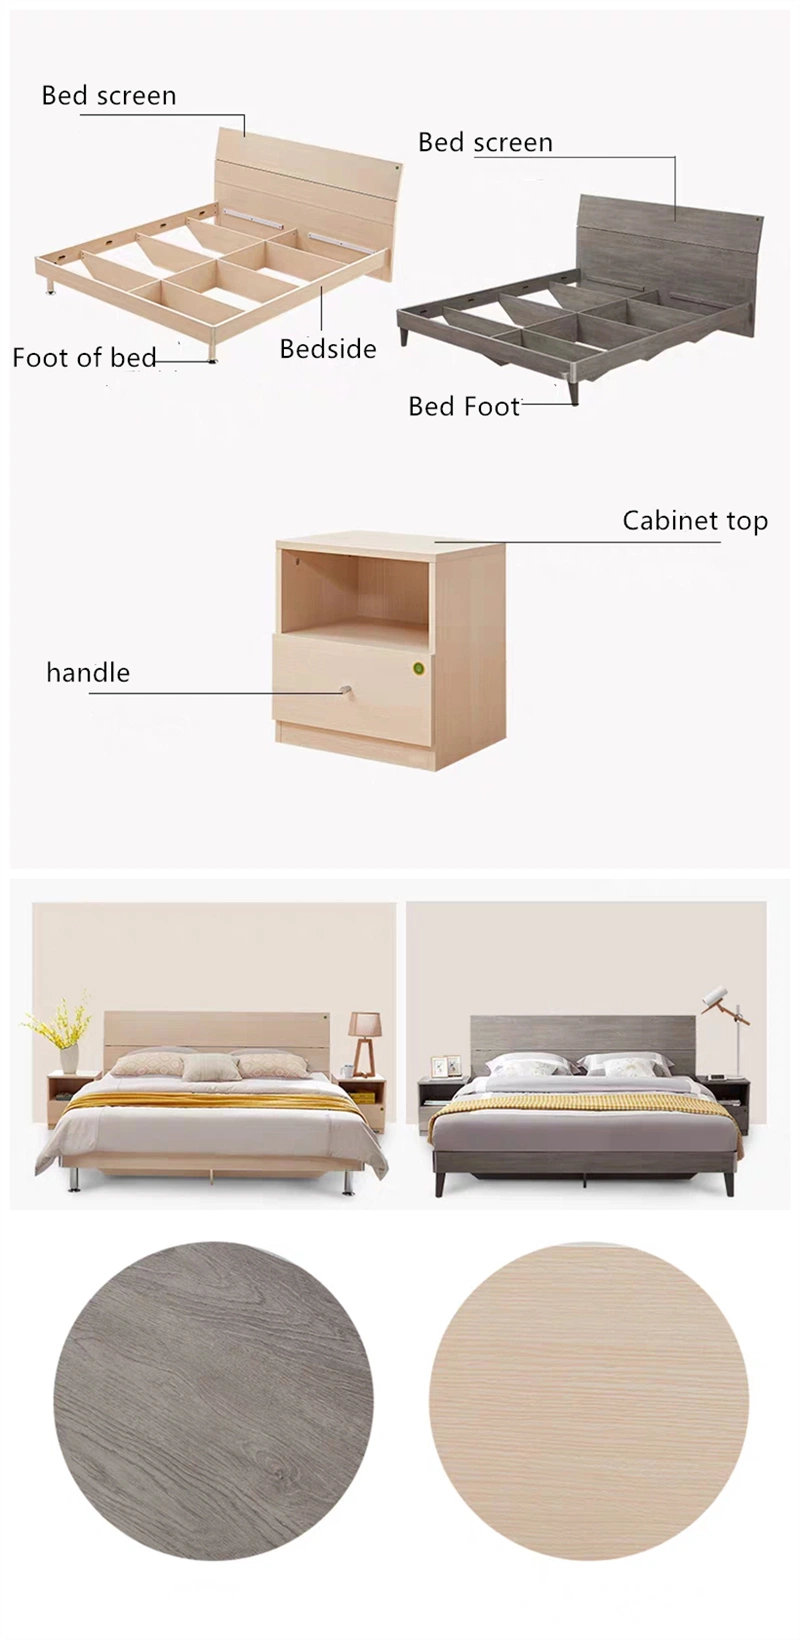 Modern Wooden Home Hotel Bedroom Furniture Set Mattress Leather Round Loft Double Metal Bed Frame with Drawer Cabinet